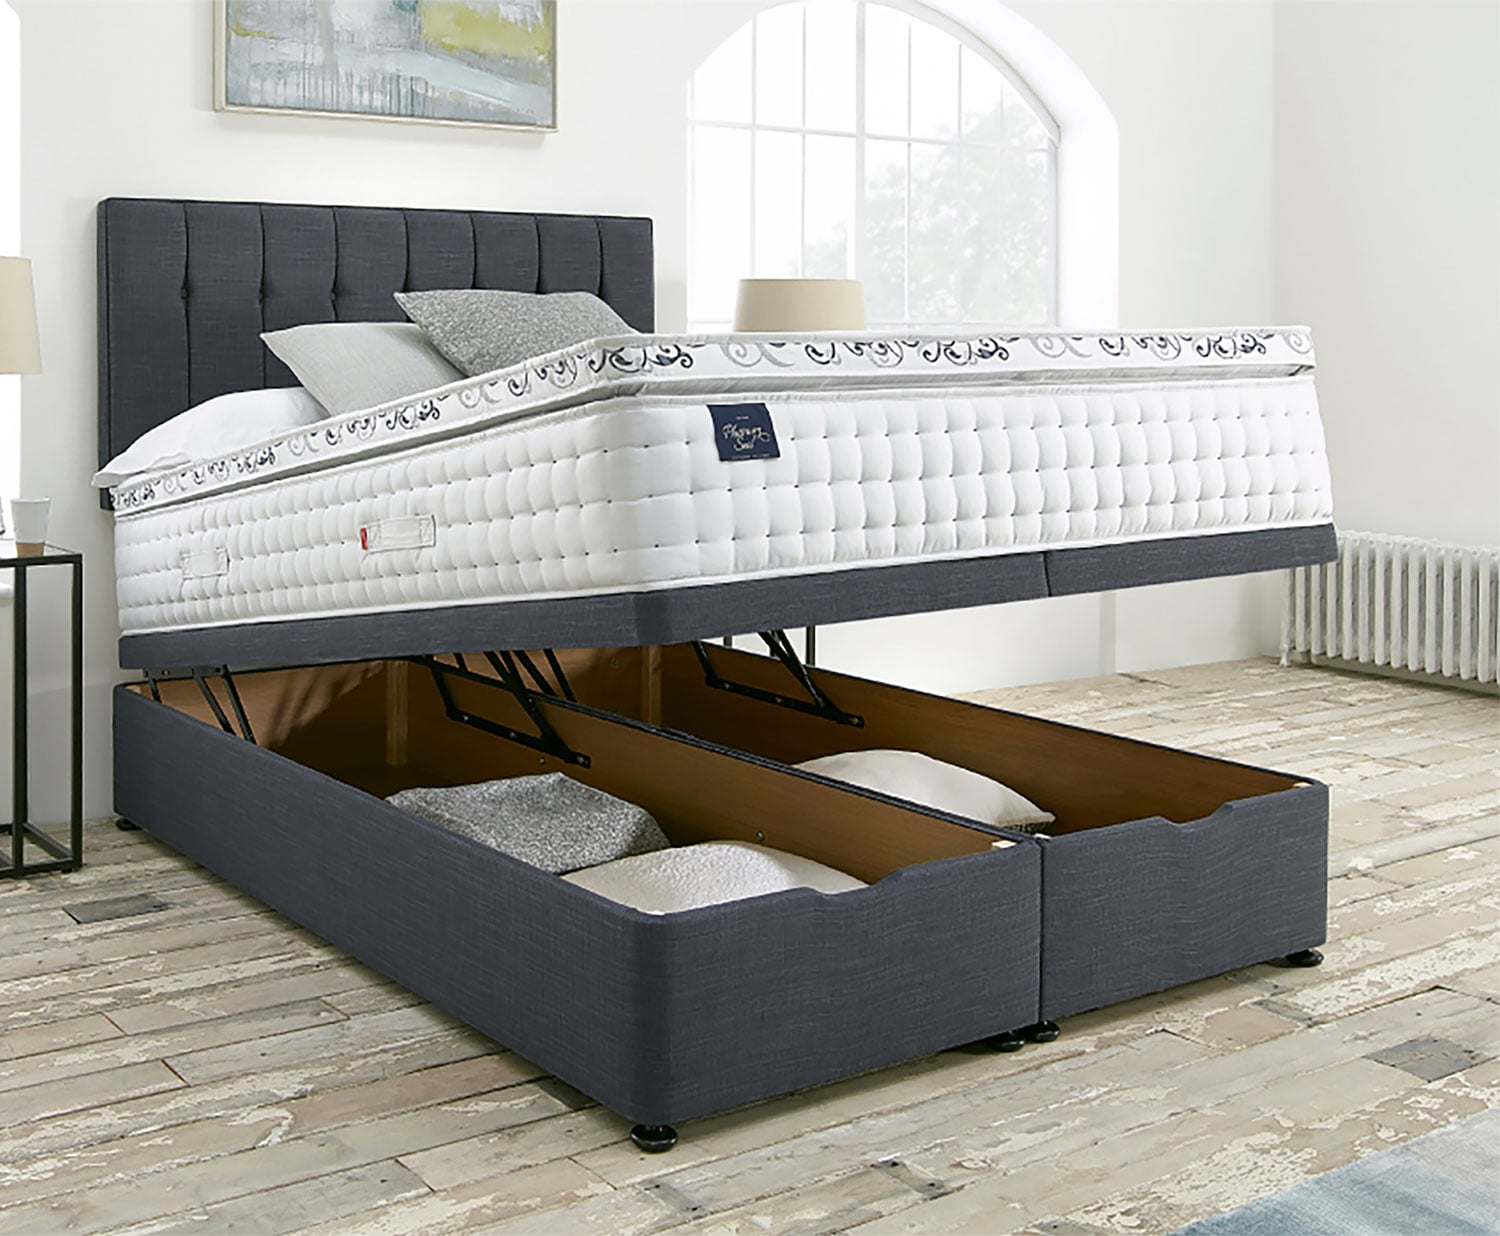 beds and mattresses online uk